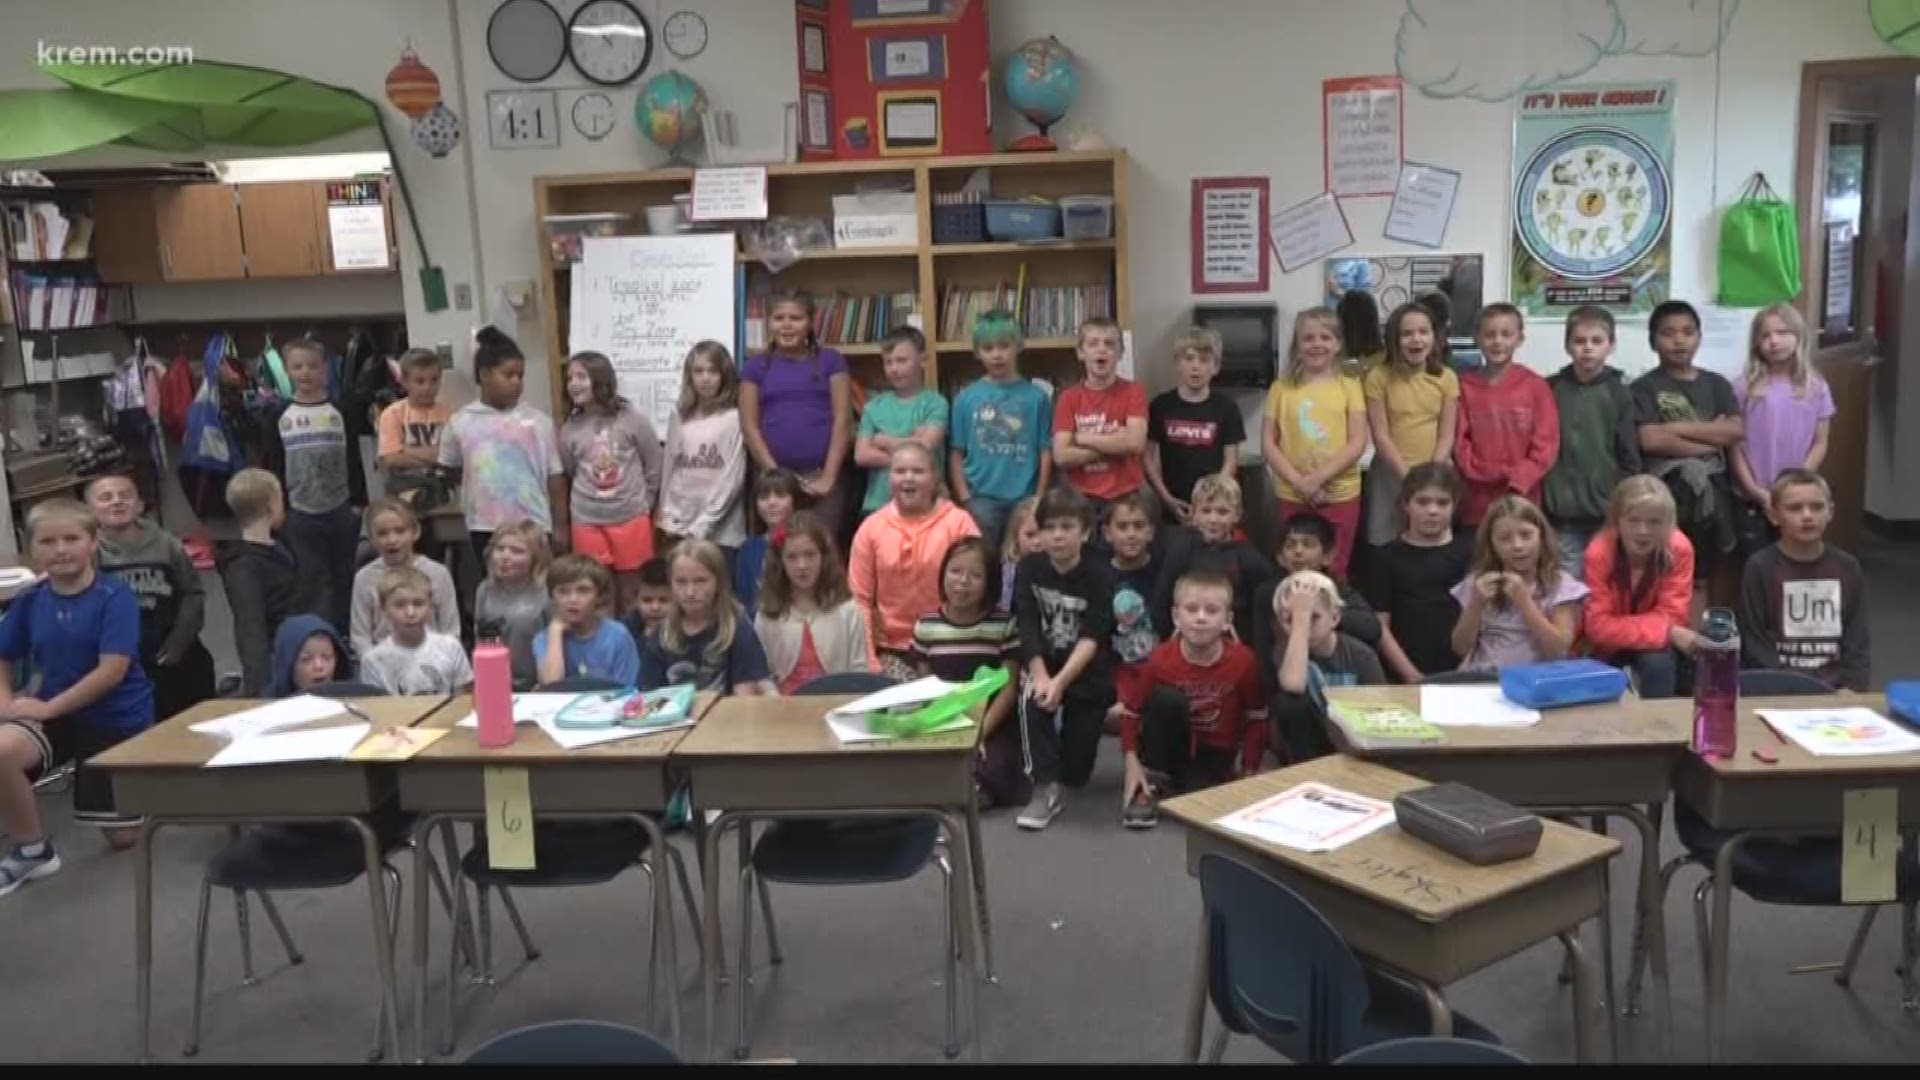 KREM's Evan Noorani visited the third graders at East Farms Elementary in Newman Lake for KREM in the Classroom.